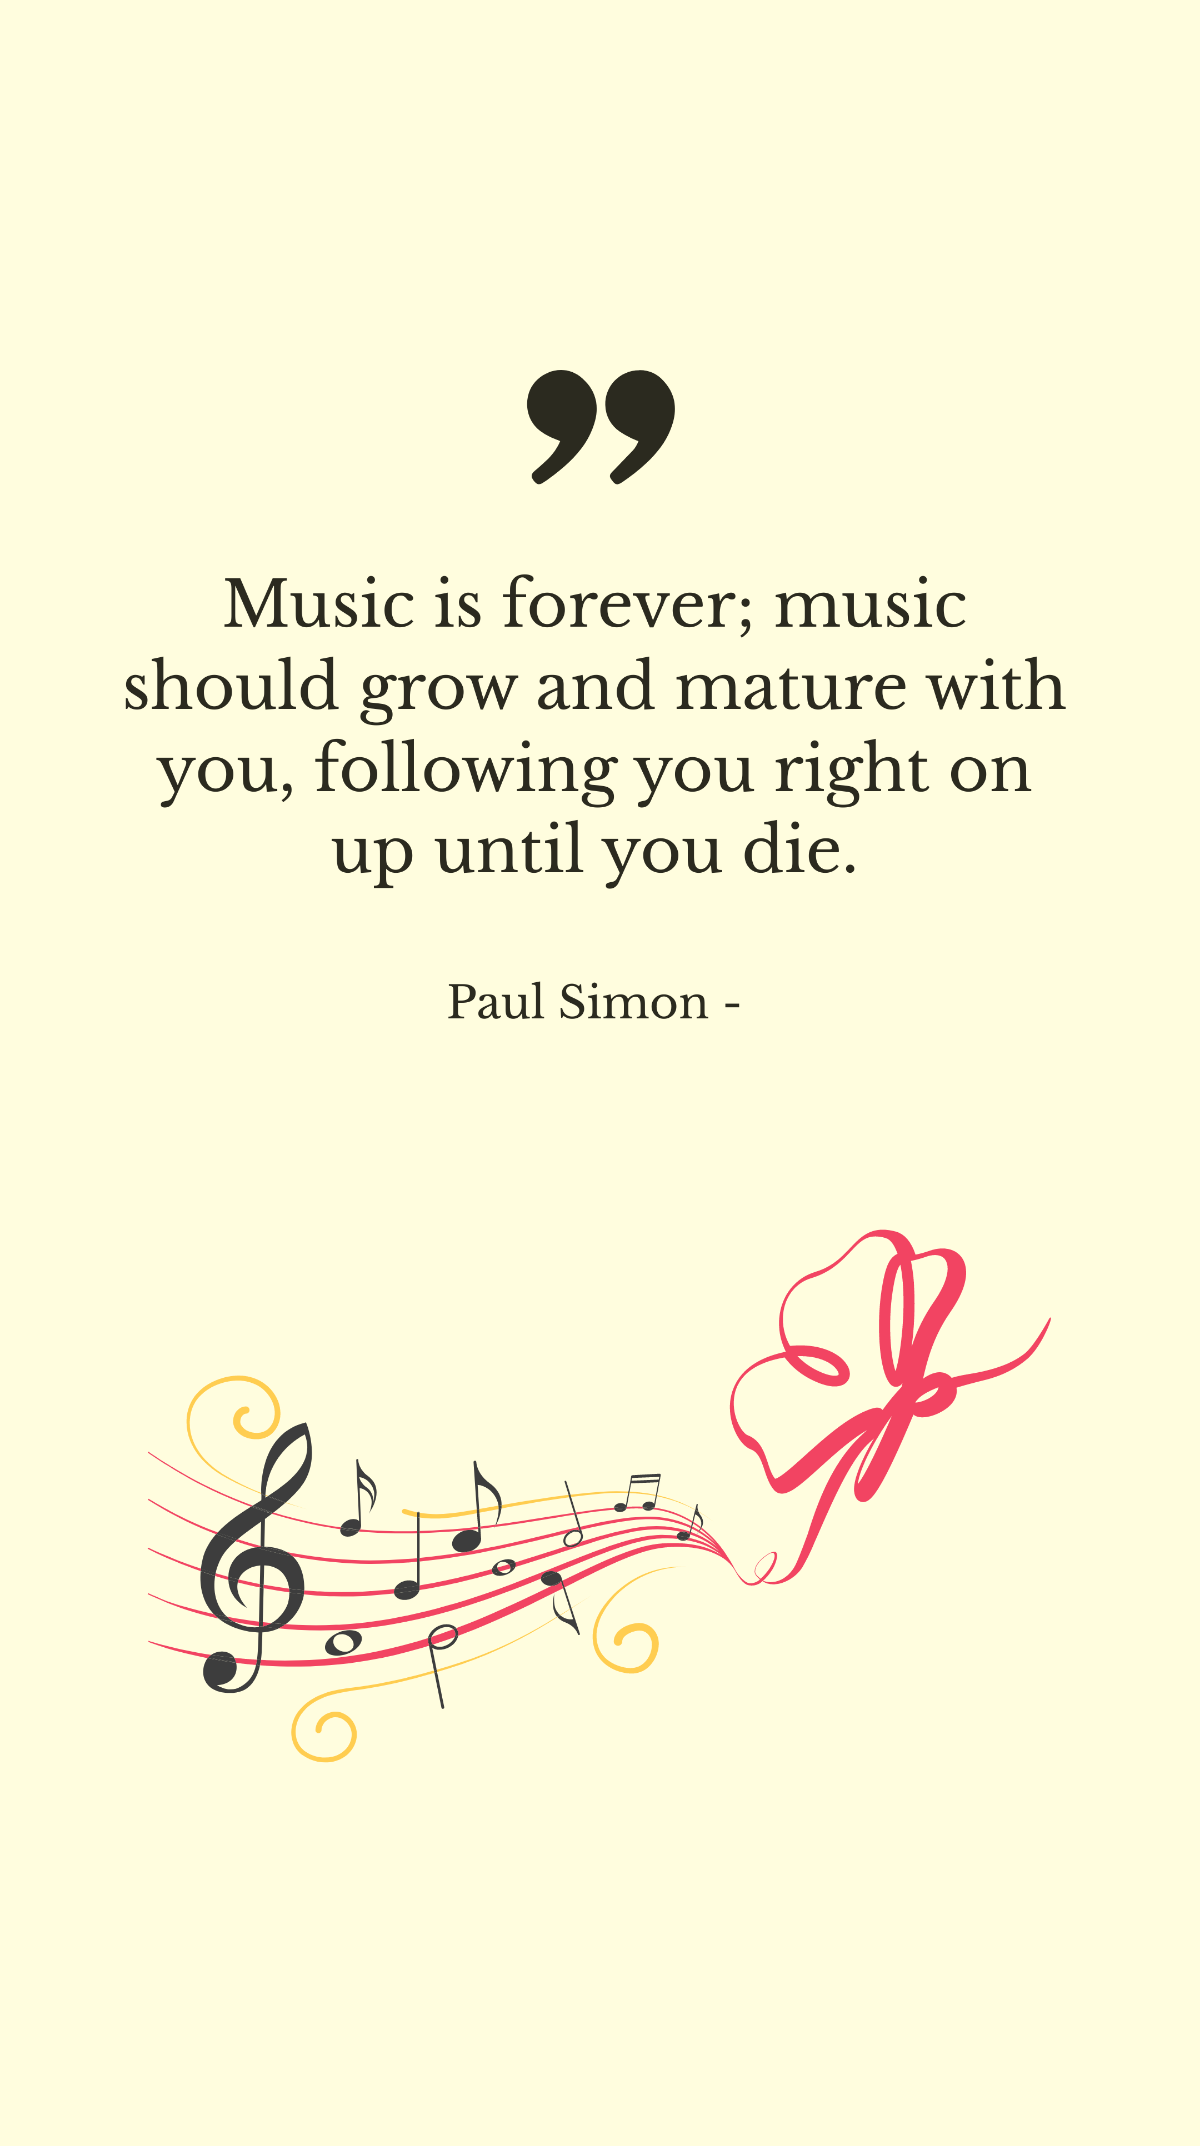 Paul Simon - Music is forever; music should grow and mature with you, following you right on up until you die. Template